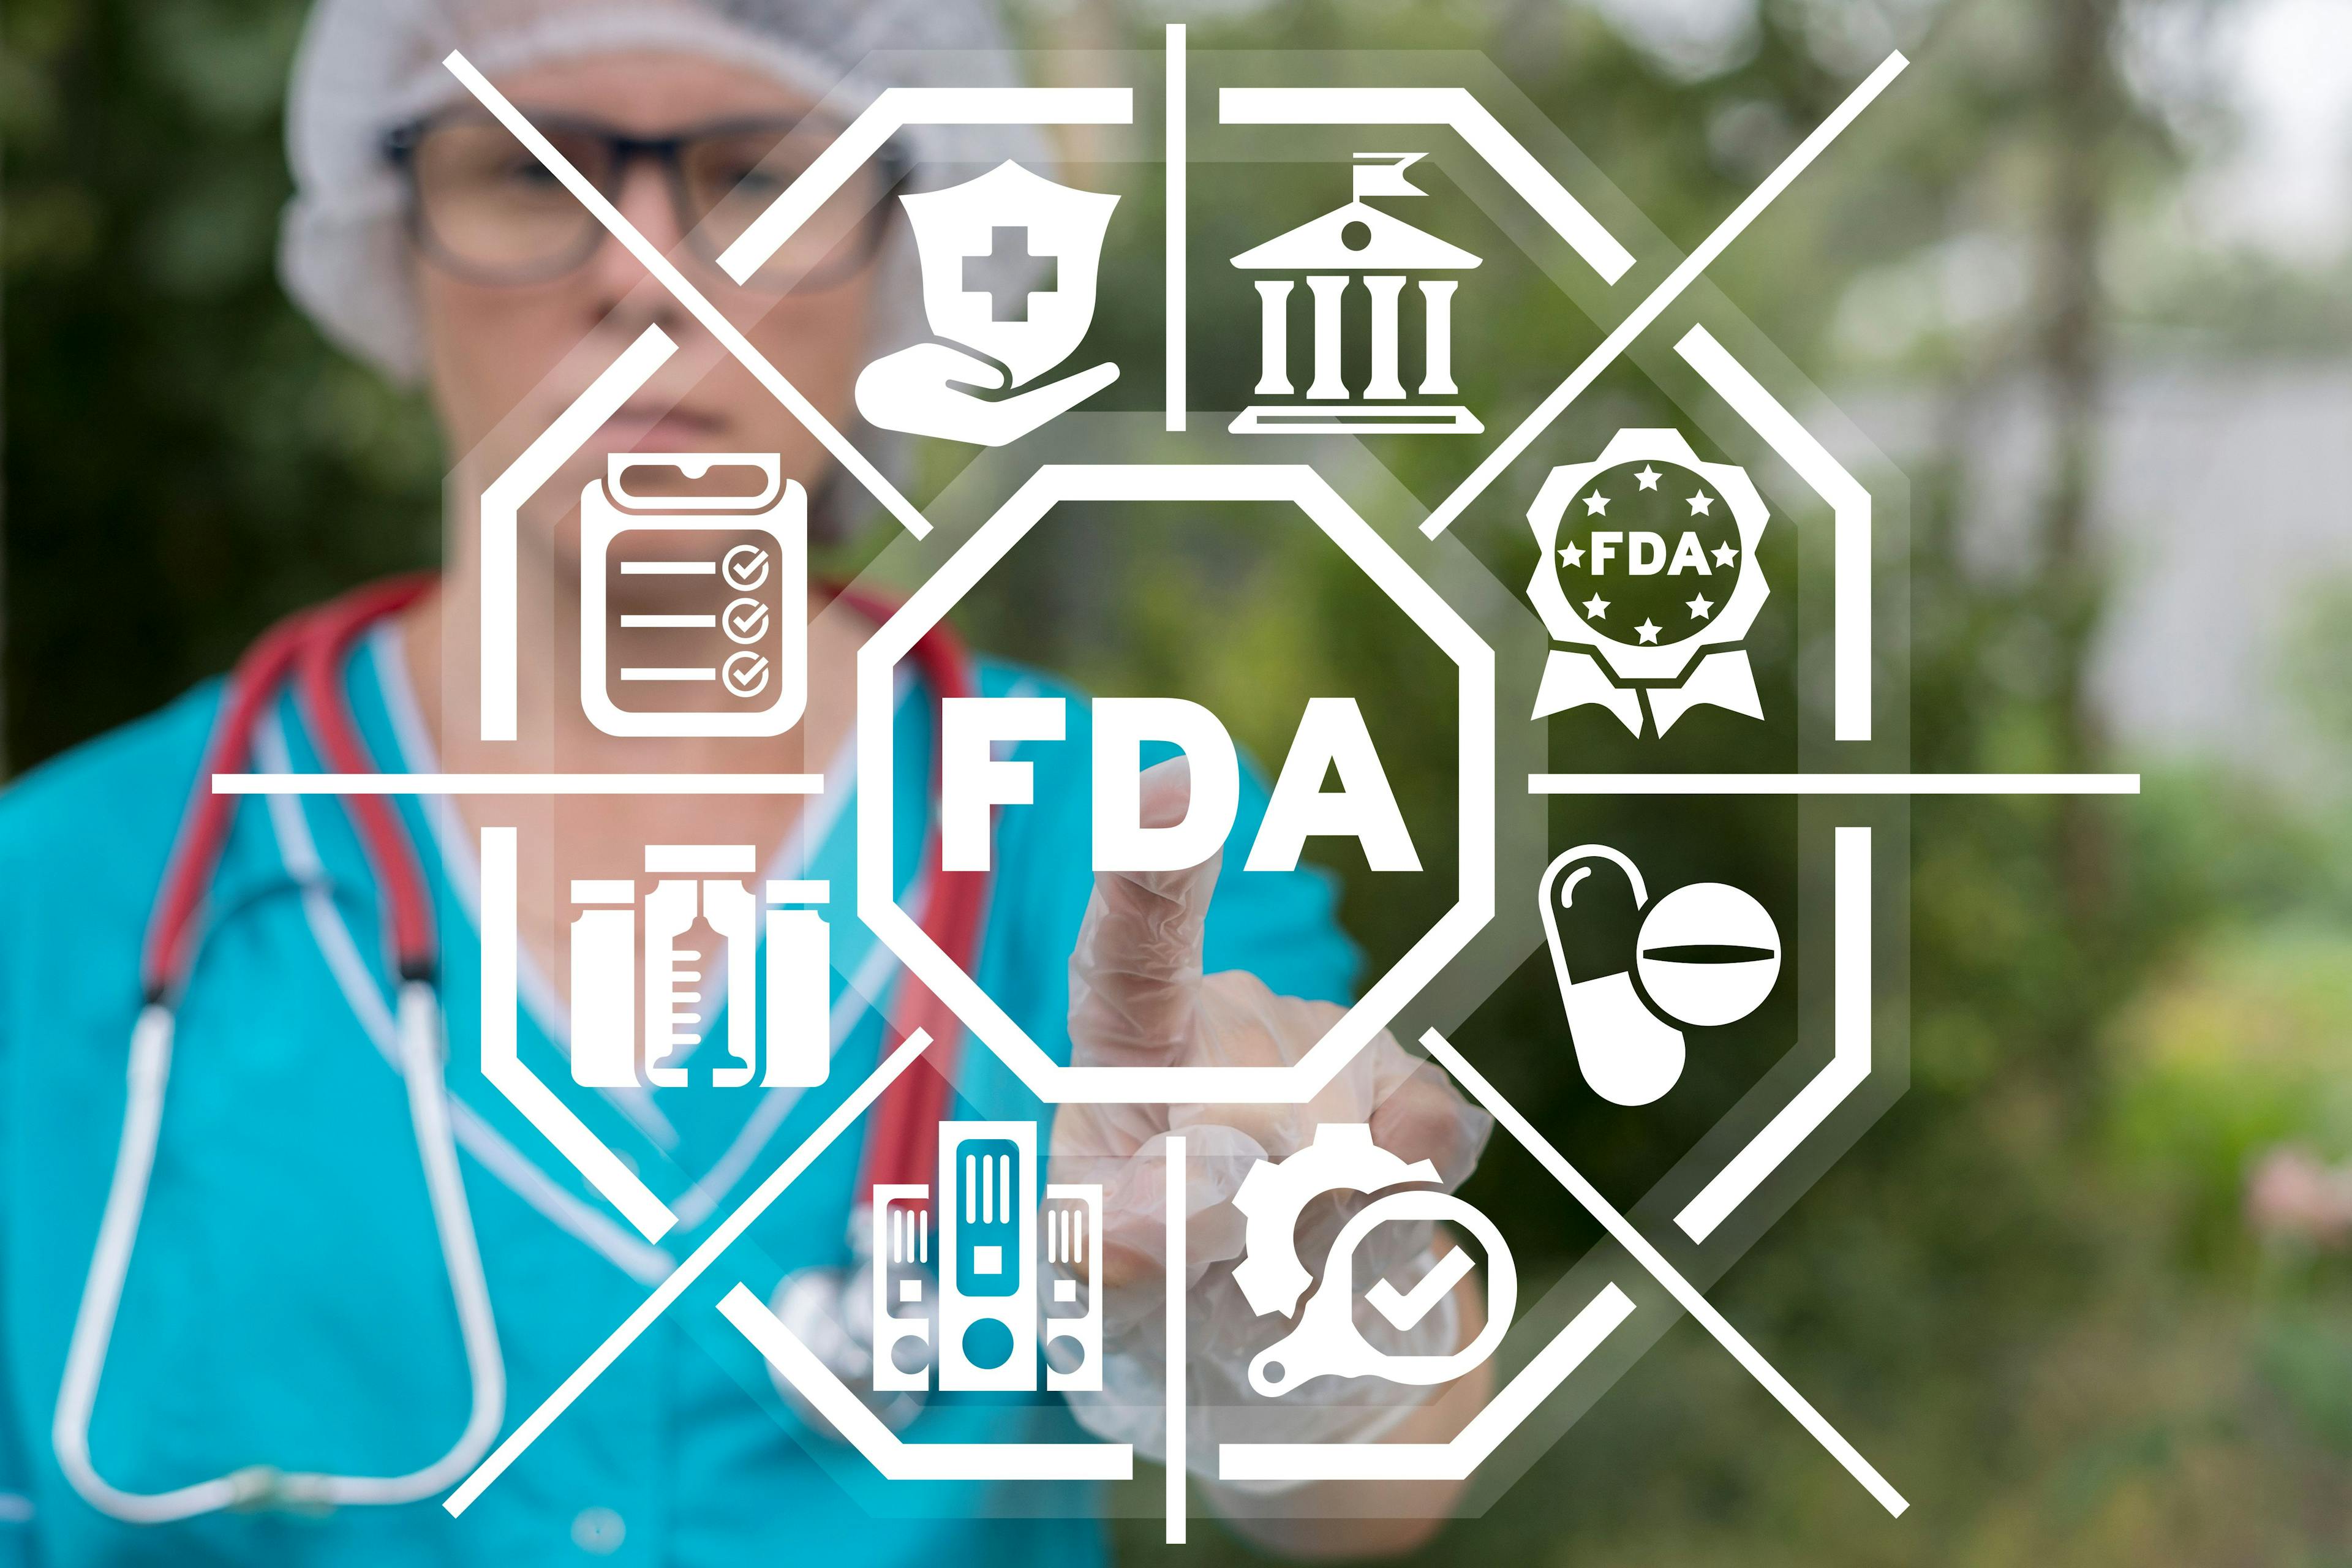 Concept of FDA Food and Drug Administration